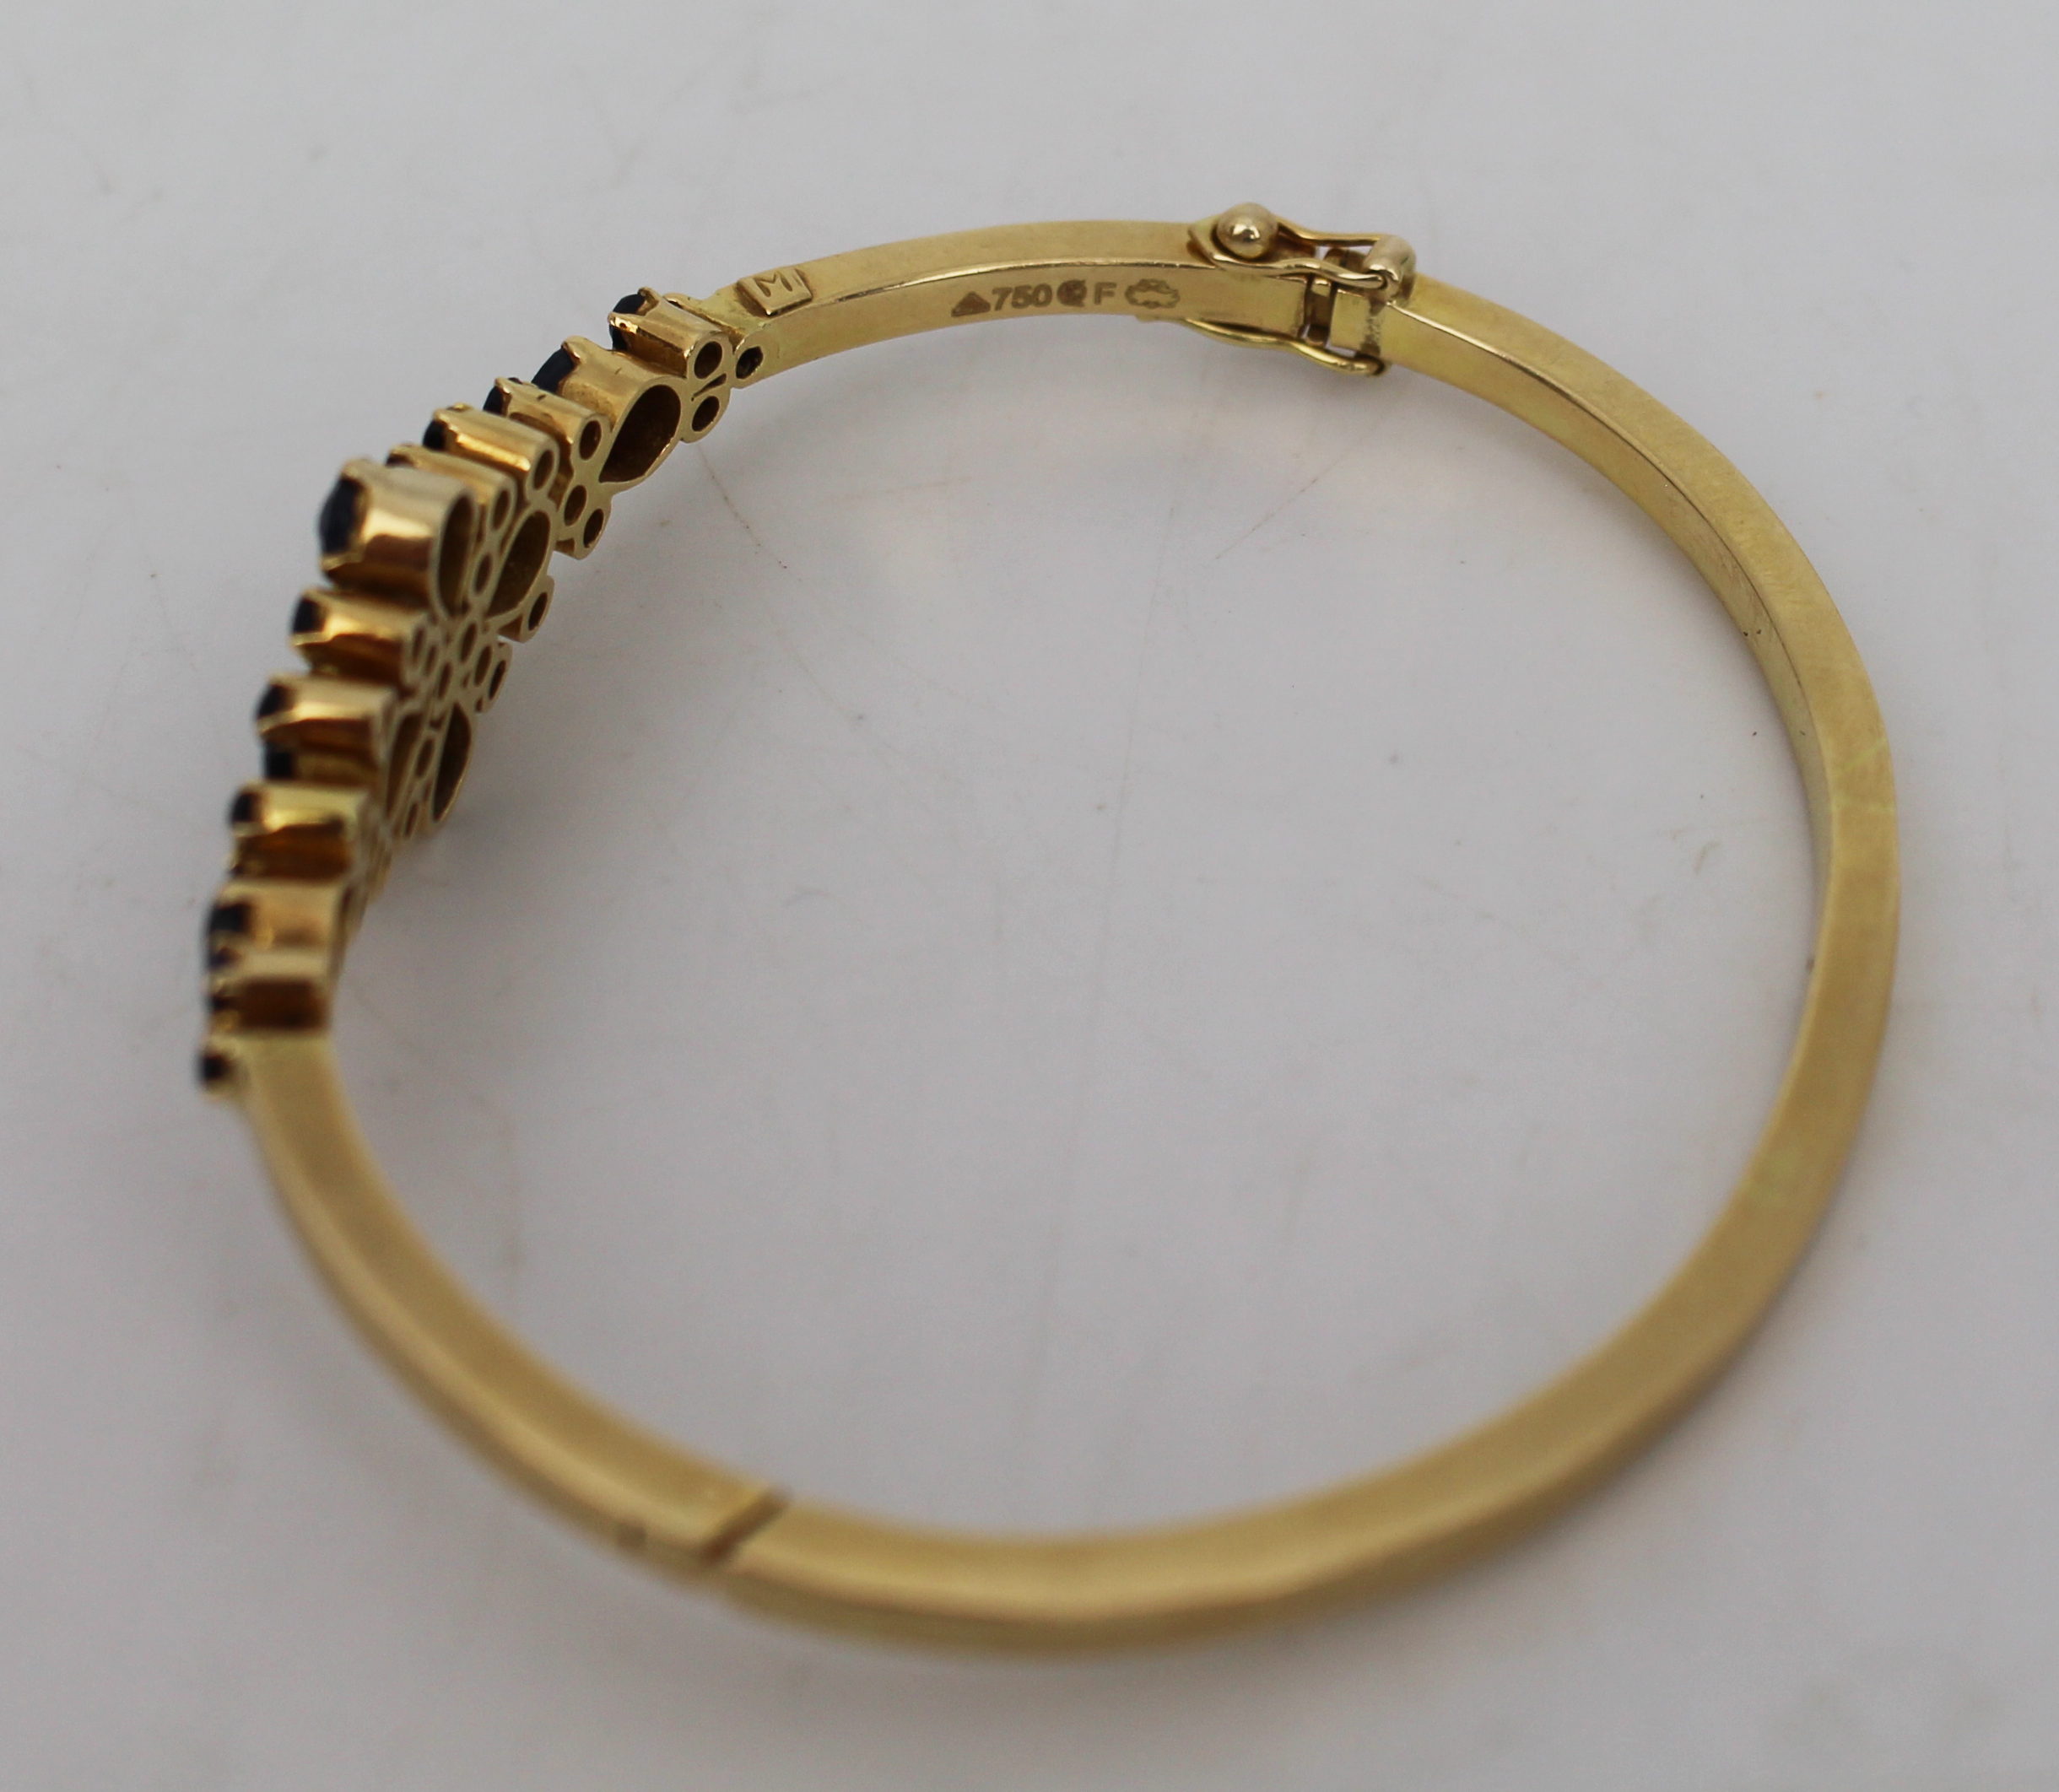 Russian Sapphire 18ct Gold Bracelet - Image 3 of 4